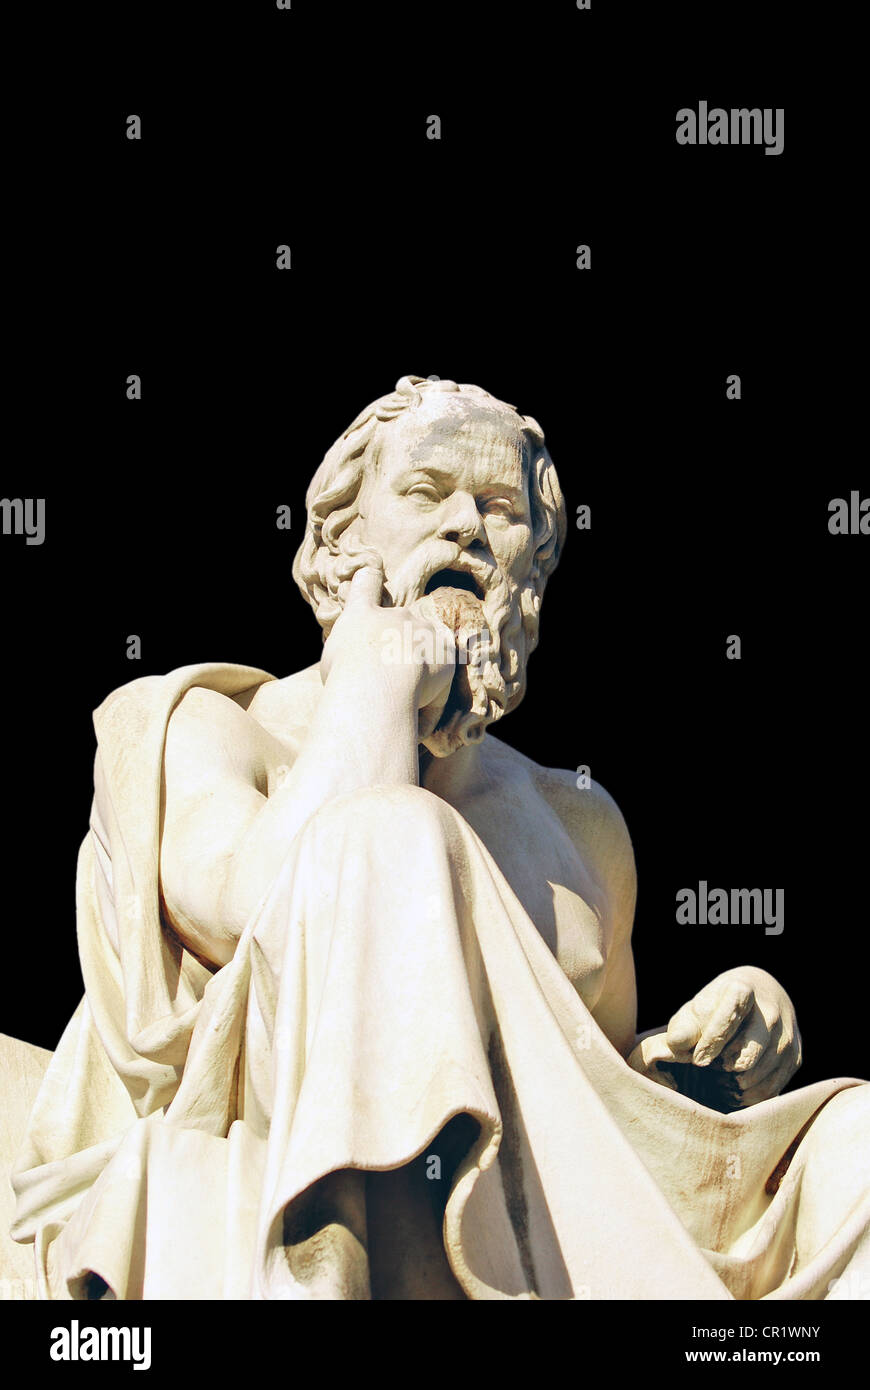 Socrates statue at the Academy of Athens building in Athens, Greece (isolated in black) Stock Photo